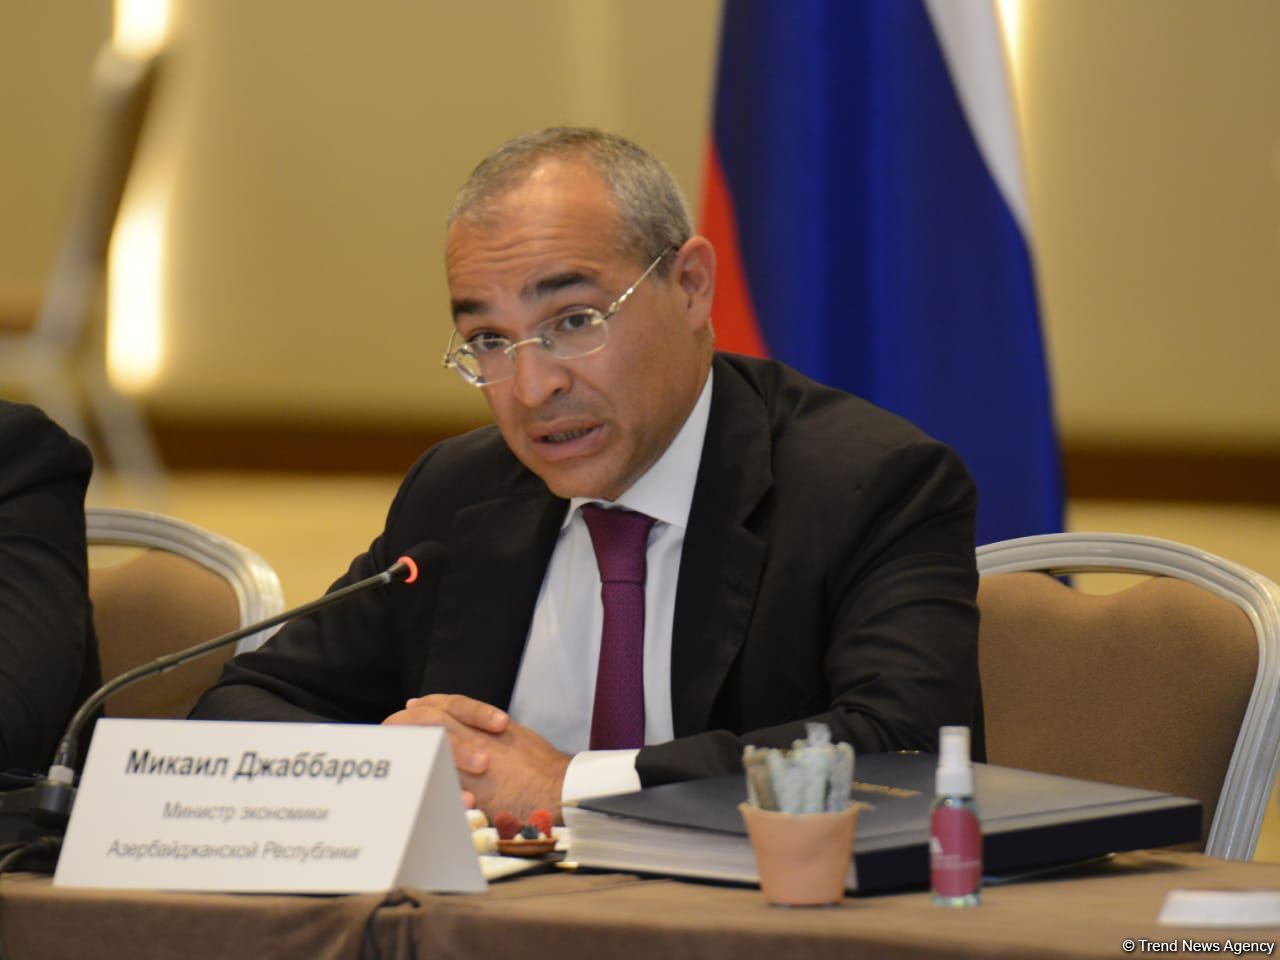 Rise in number of business entities accompanies Azerbaijan's economic recovery - minister